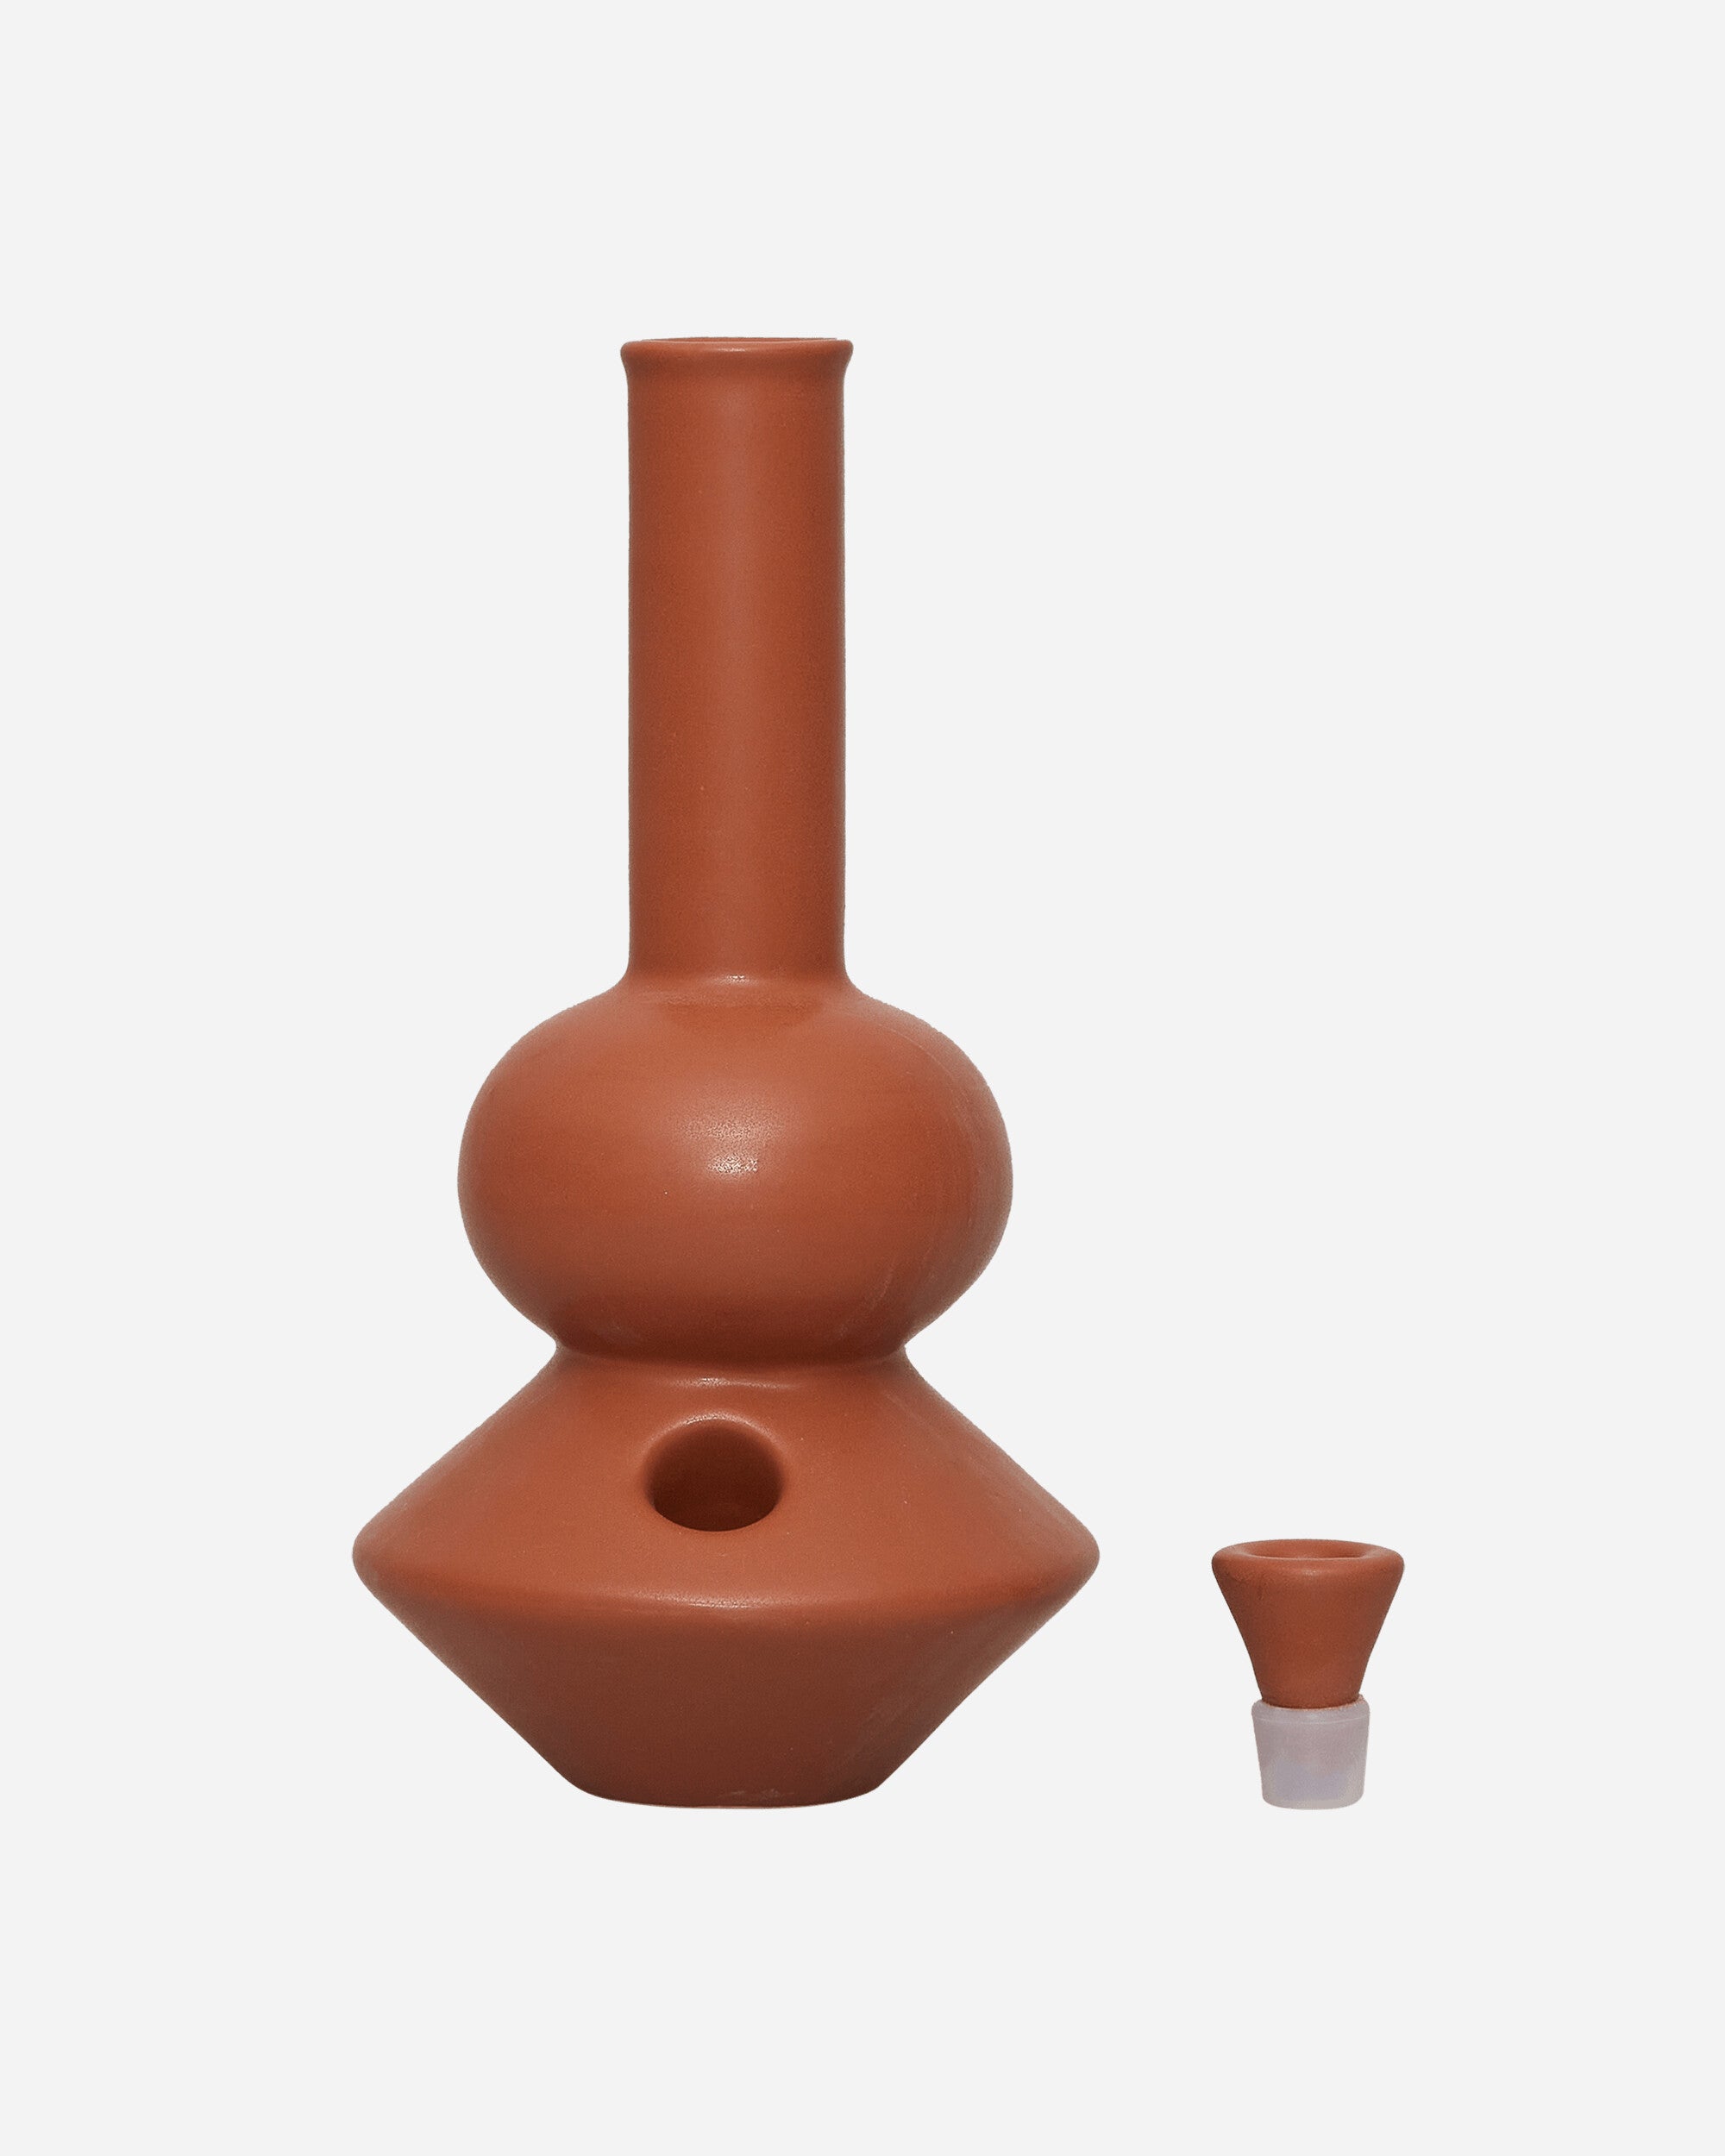 Summerland Ceramics The Land Yatch Terracotta High Times Bongs and Pipes LYTC 1